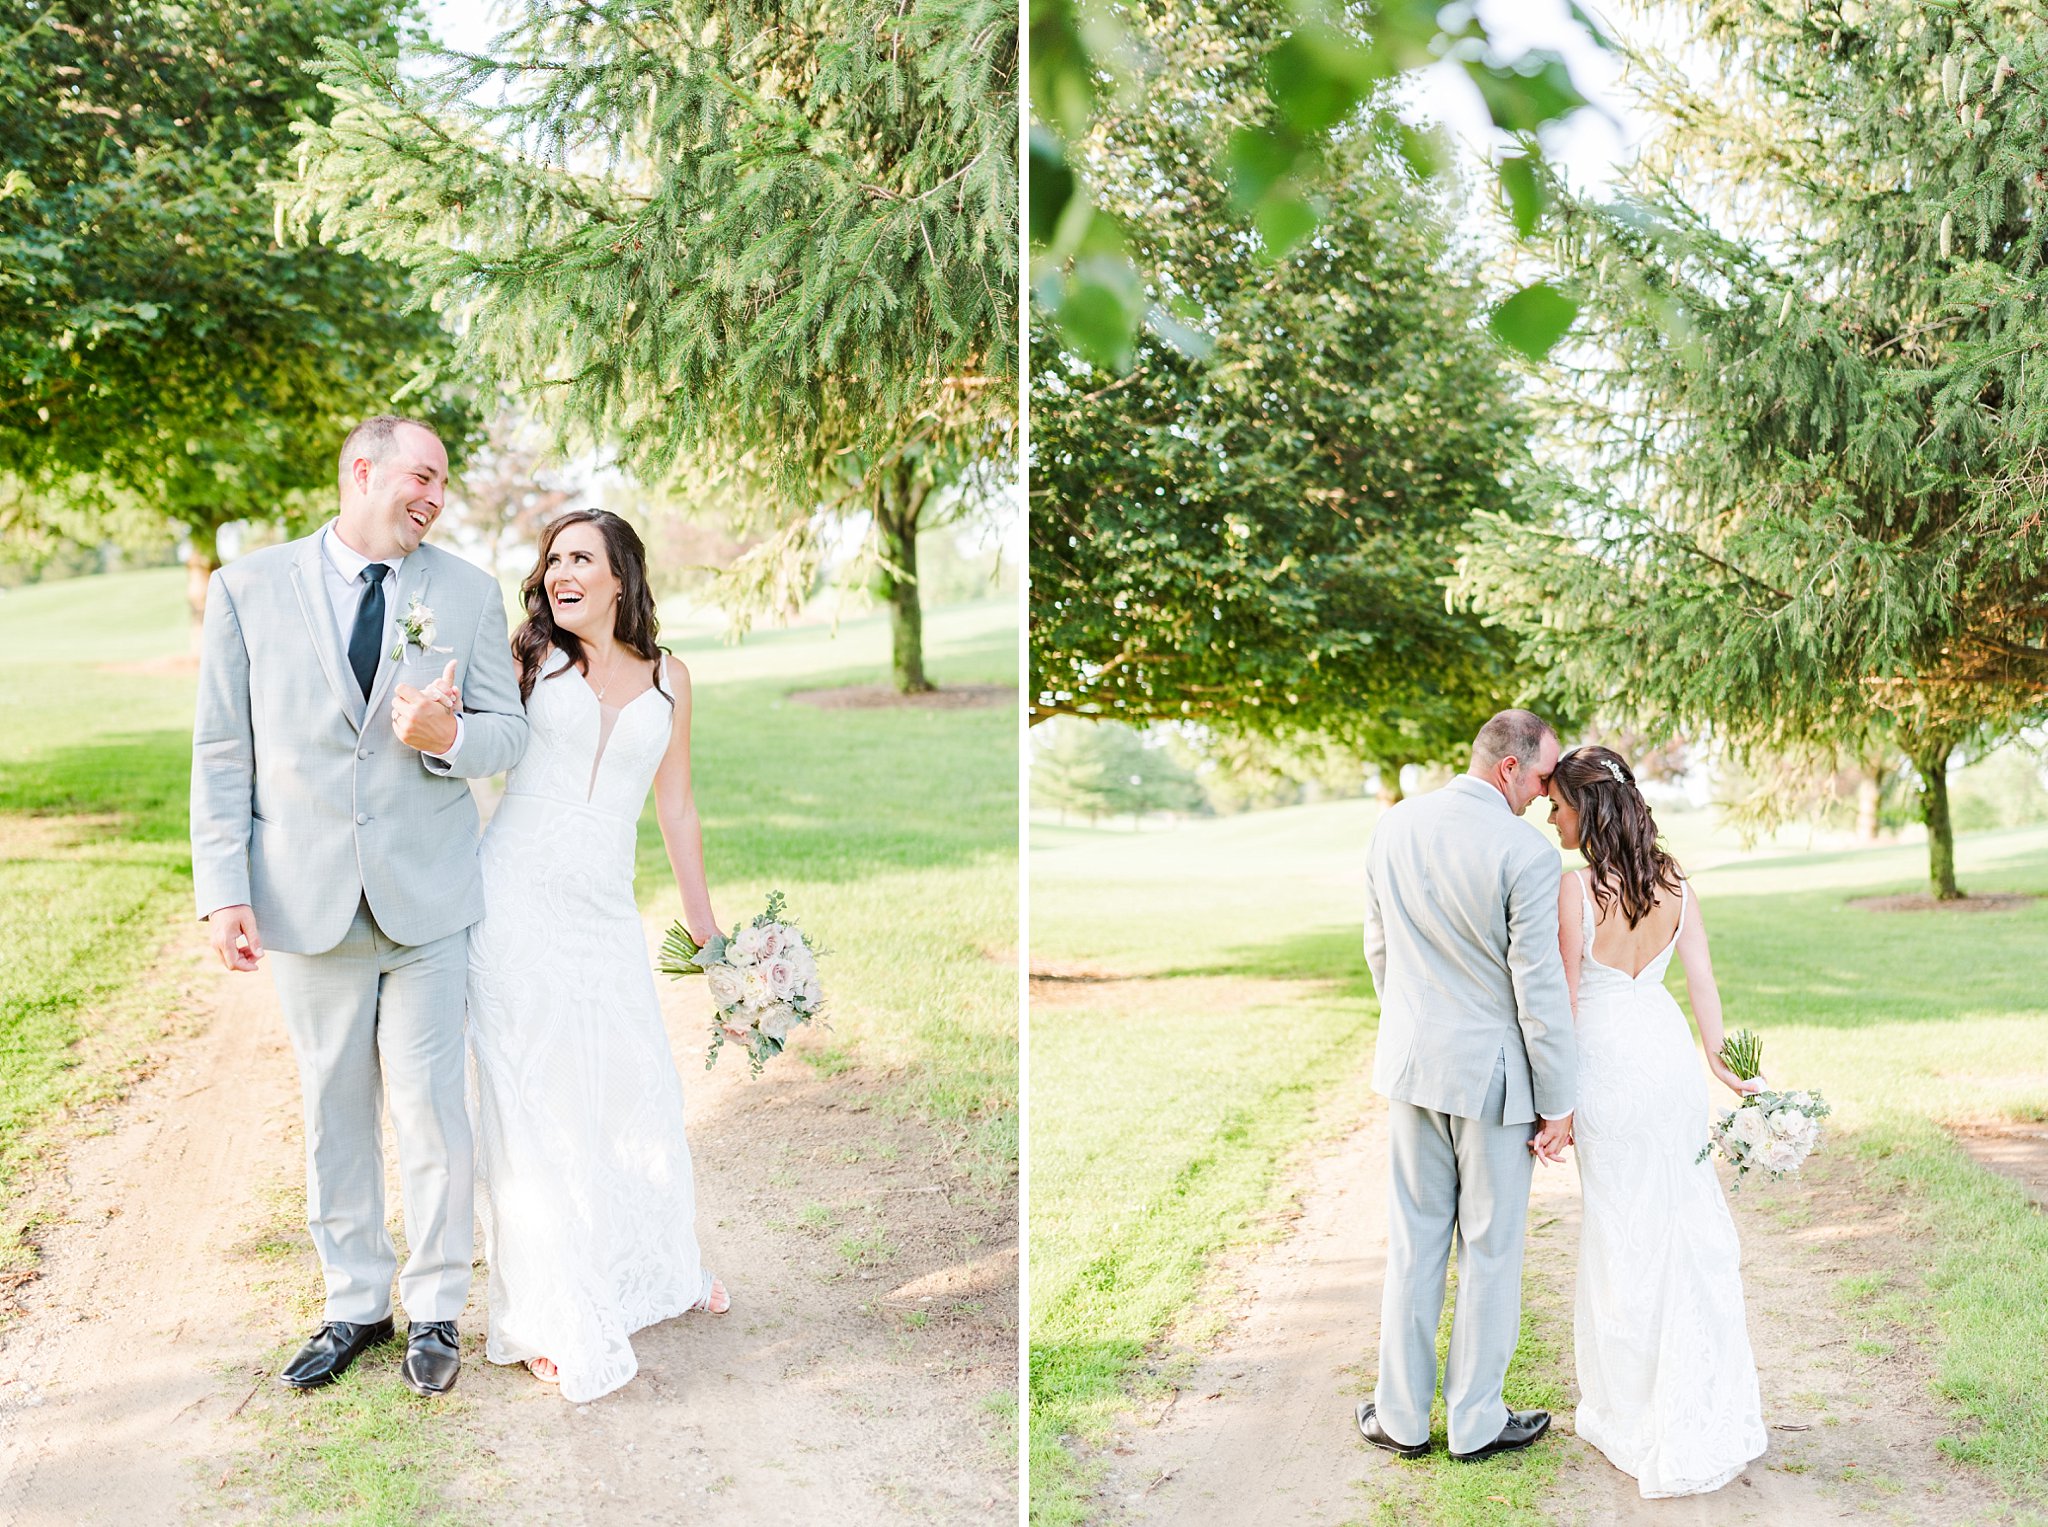 a bride and groom walk down a path bumping into one another and laughing